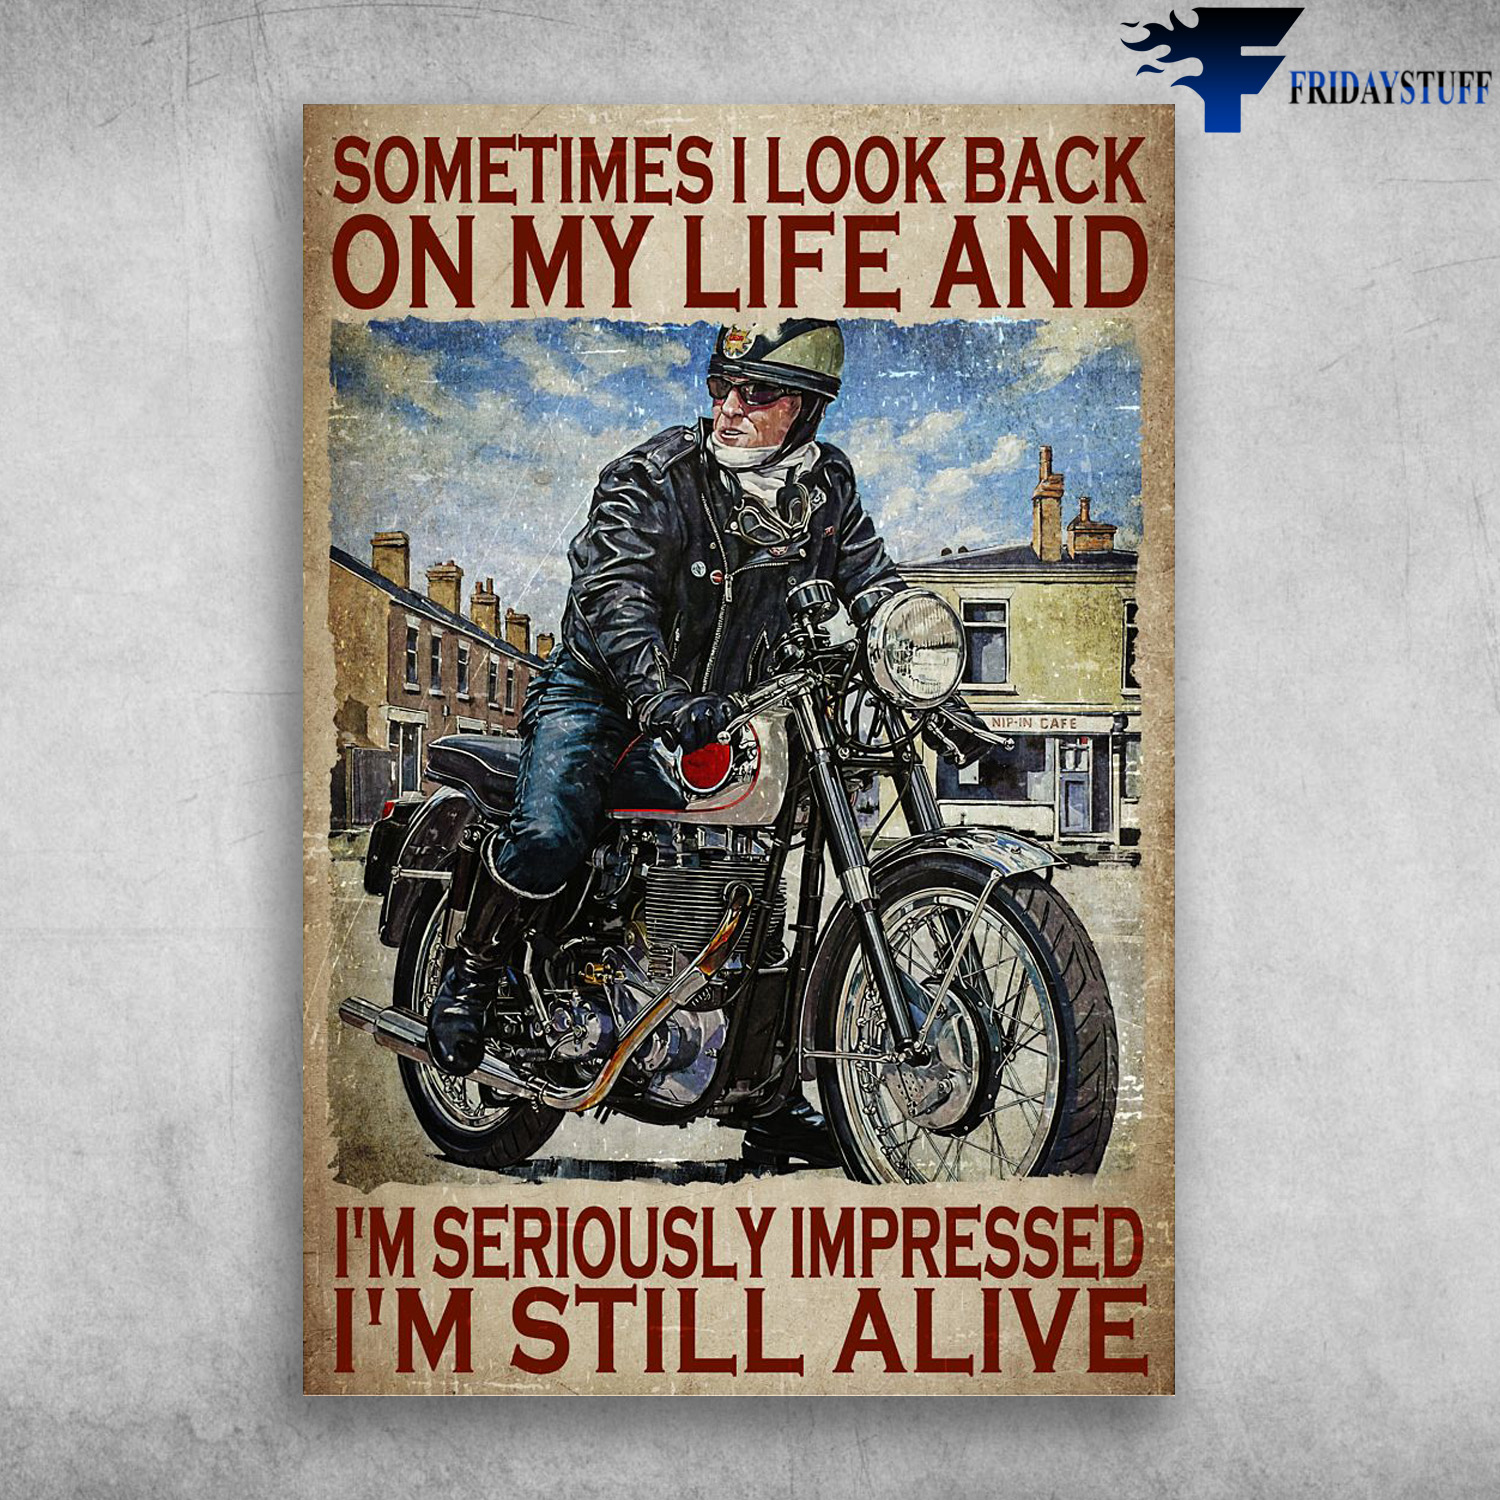 Man Motorcycle - Sometimes I Look Back On My Life, And I'm Seriously Impressed, I'm Still Alive